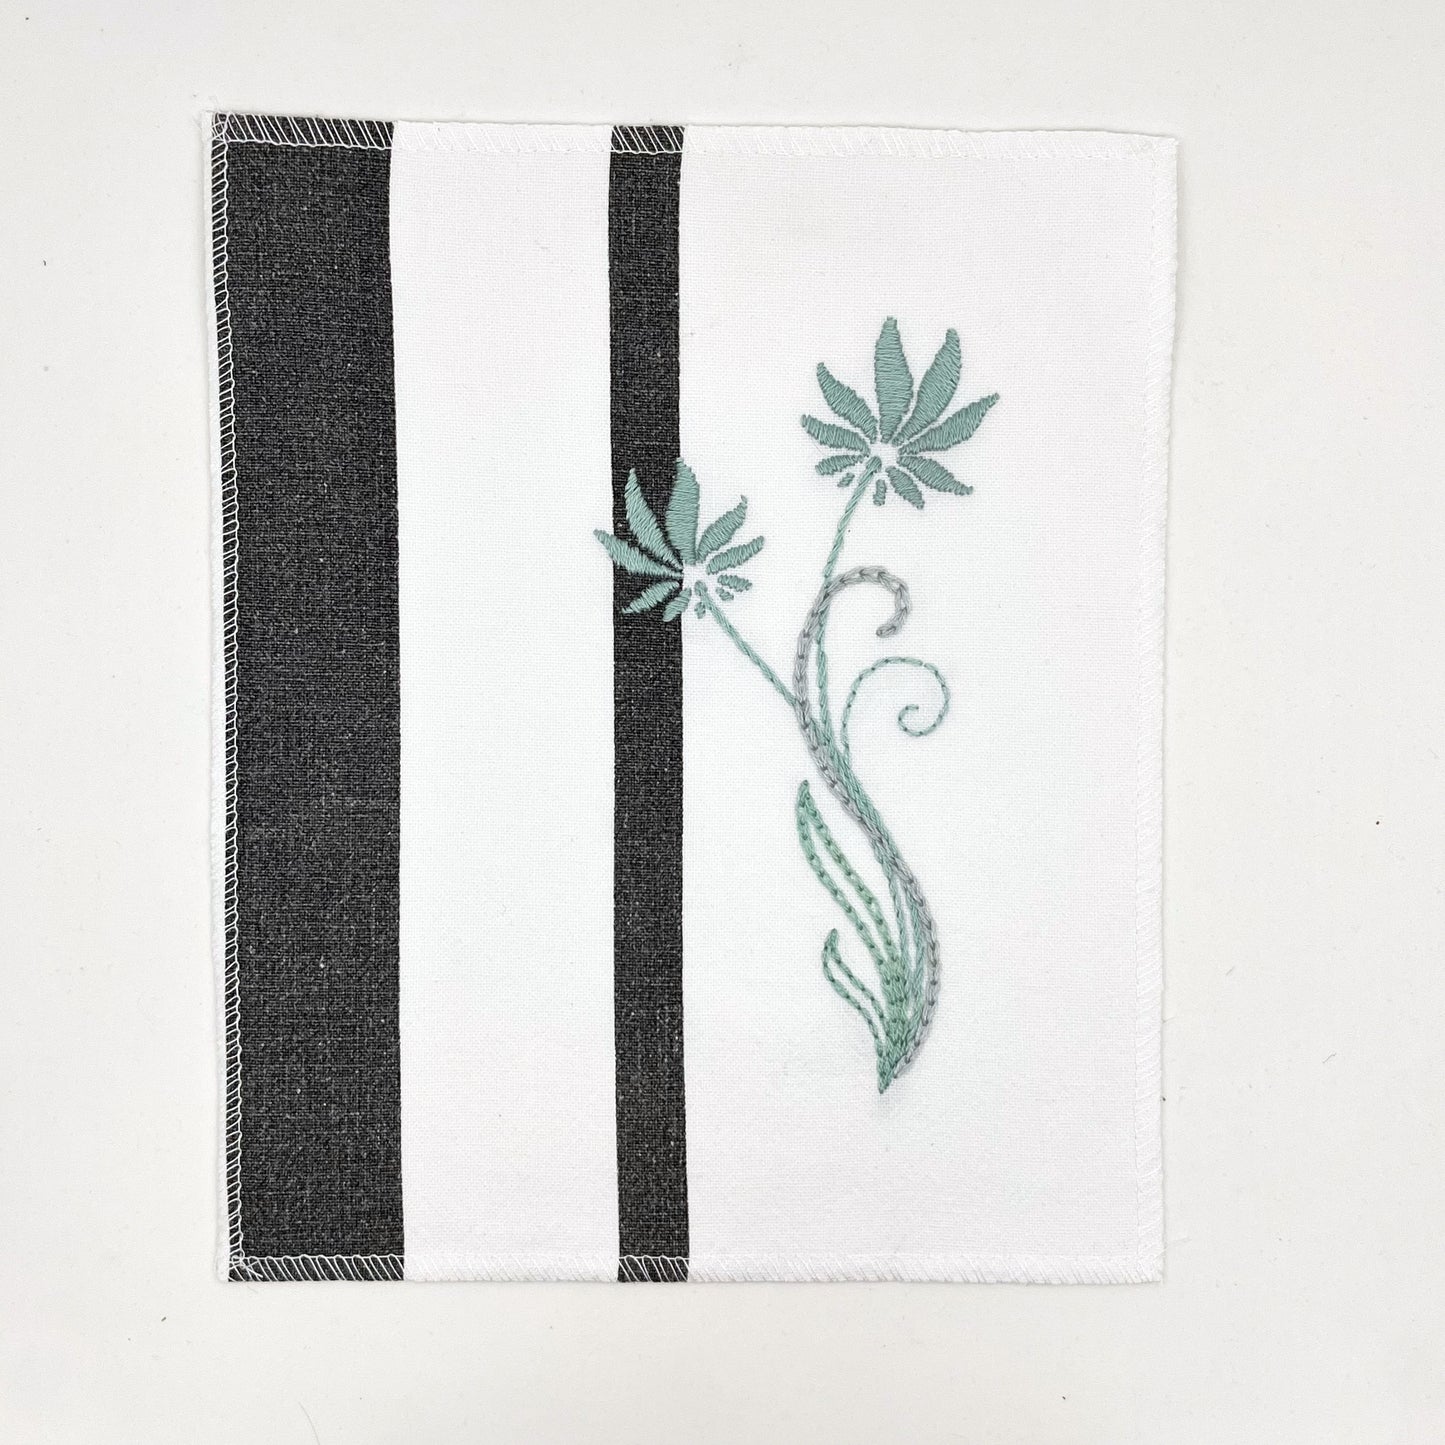 a fabric wall hanging made out of white fabric with black vertical stripes, hand stitched with flowers in shades of sage blue with long curvy stems in chainstitch, backstitch and stem stitch, on a white background